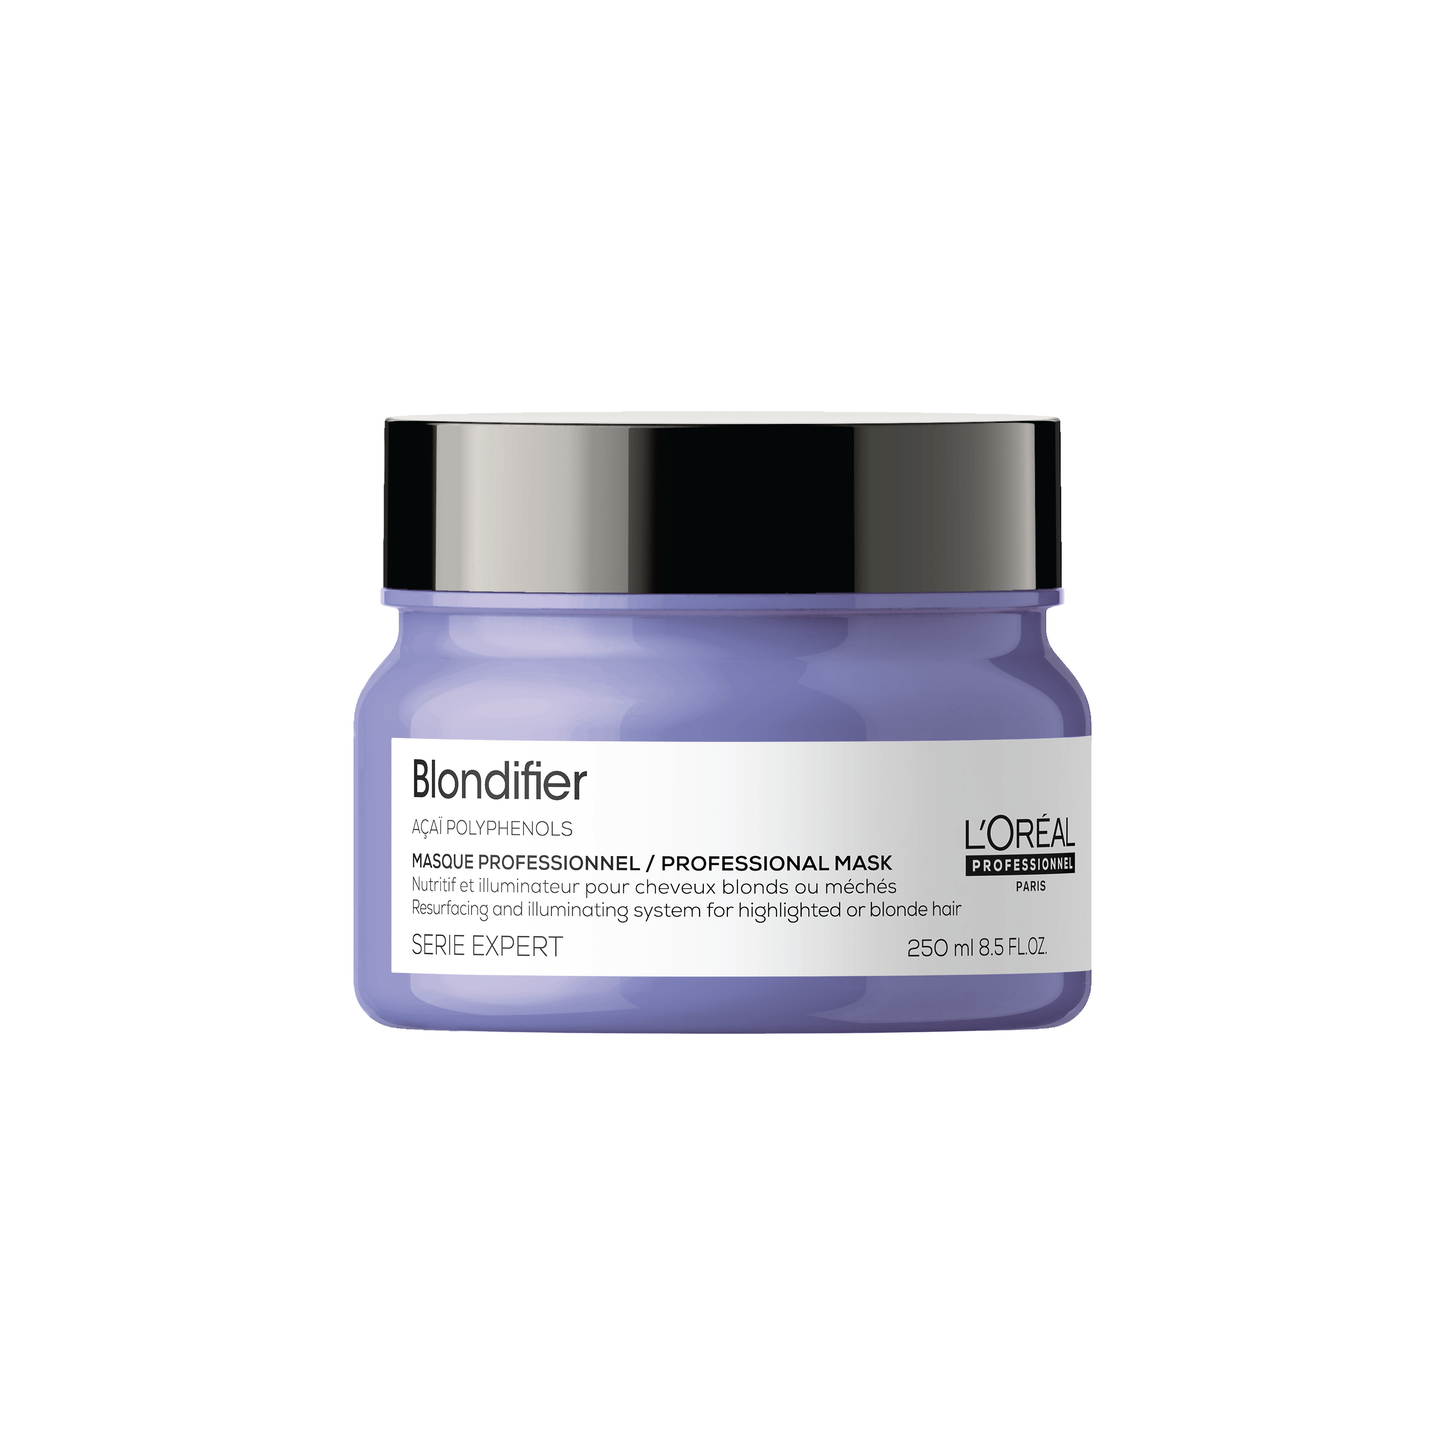 L’Oréal Professionnel Serie Expert Blondifier Restoring And Illuminating Masque 250ml